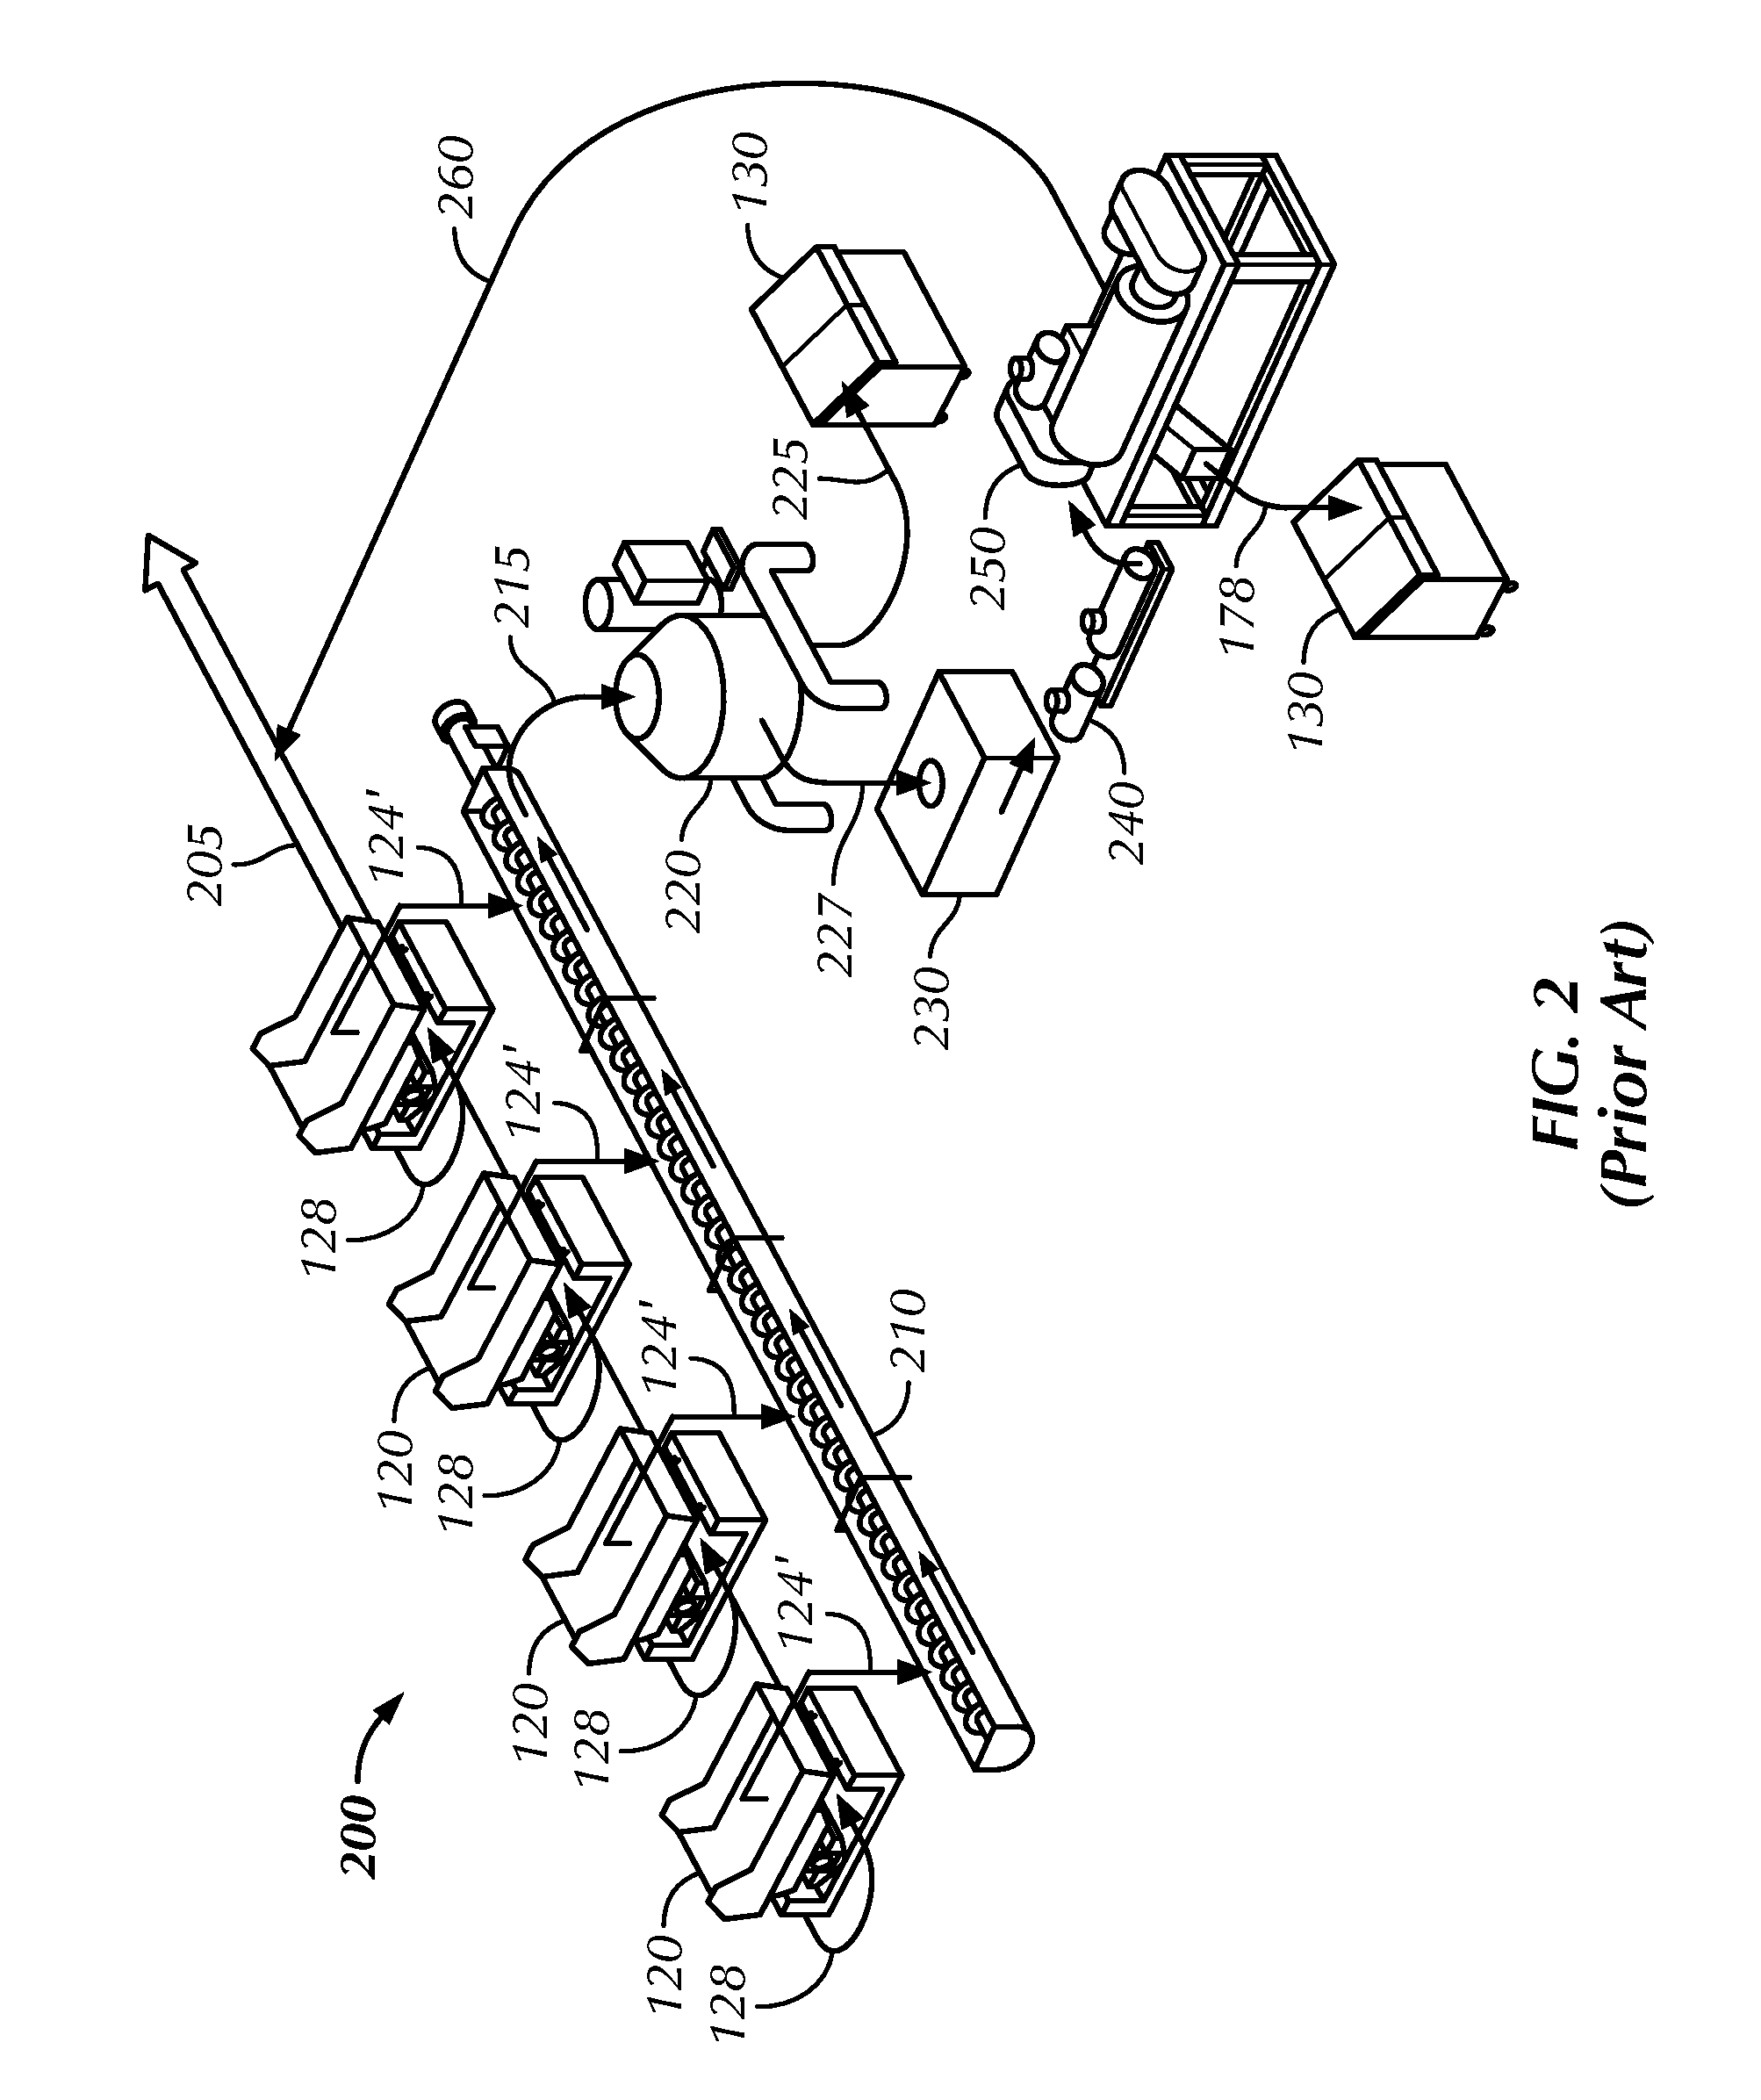 Method of Solids Control and Fluid Recovery in Drilling Operations